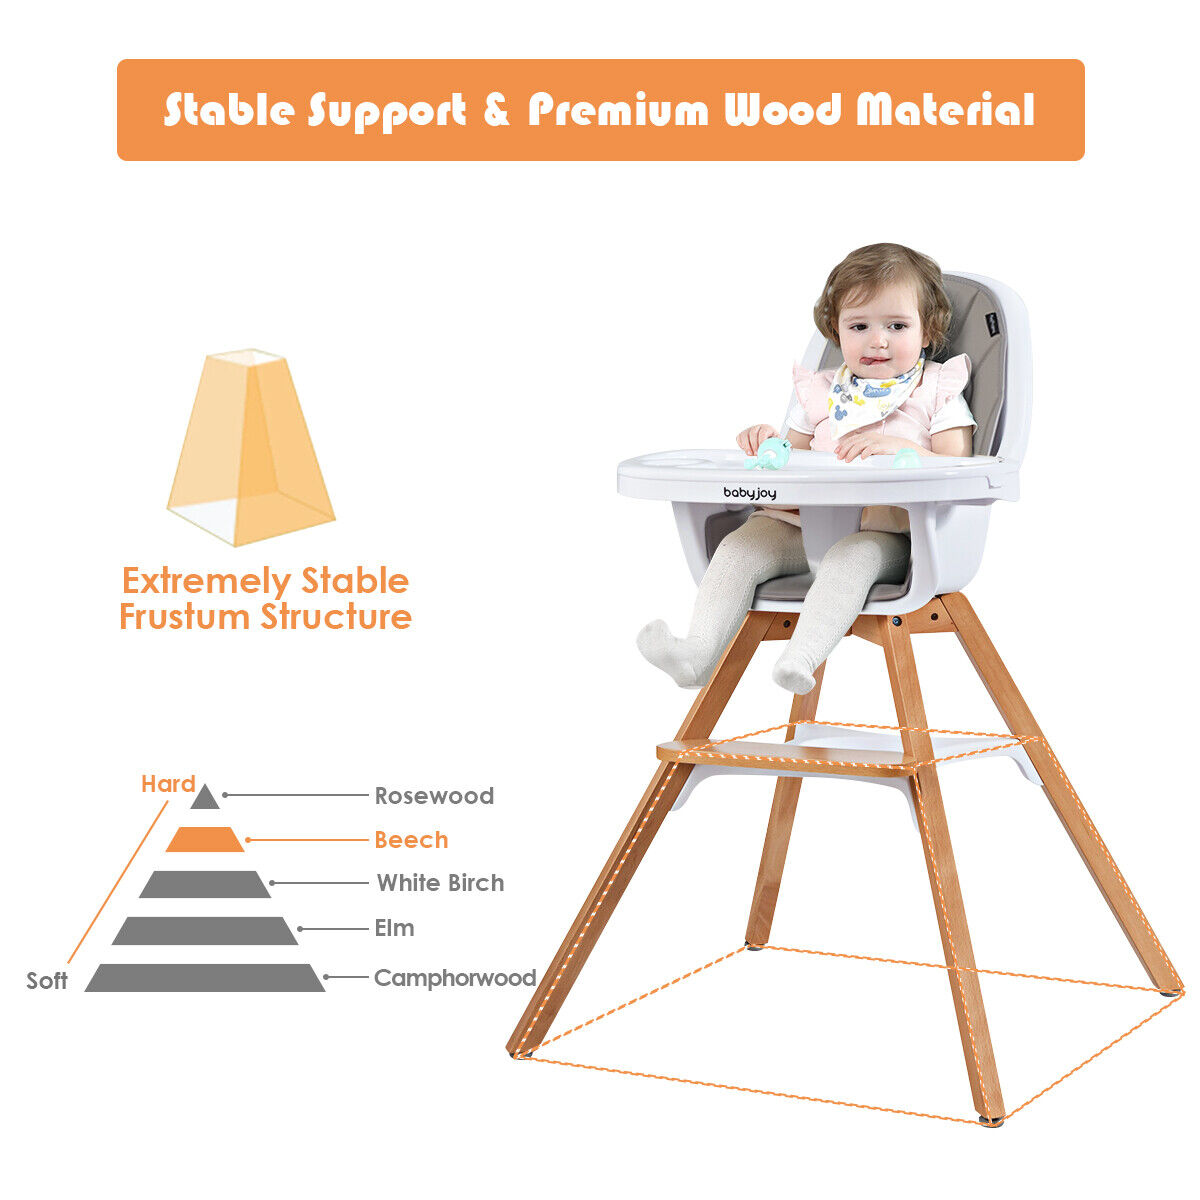 3-in-1 Convertible Wooden Baby High Chair w/ Tray Adjustable Legs Gray